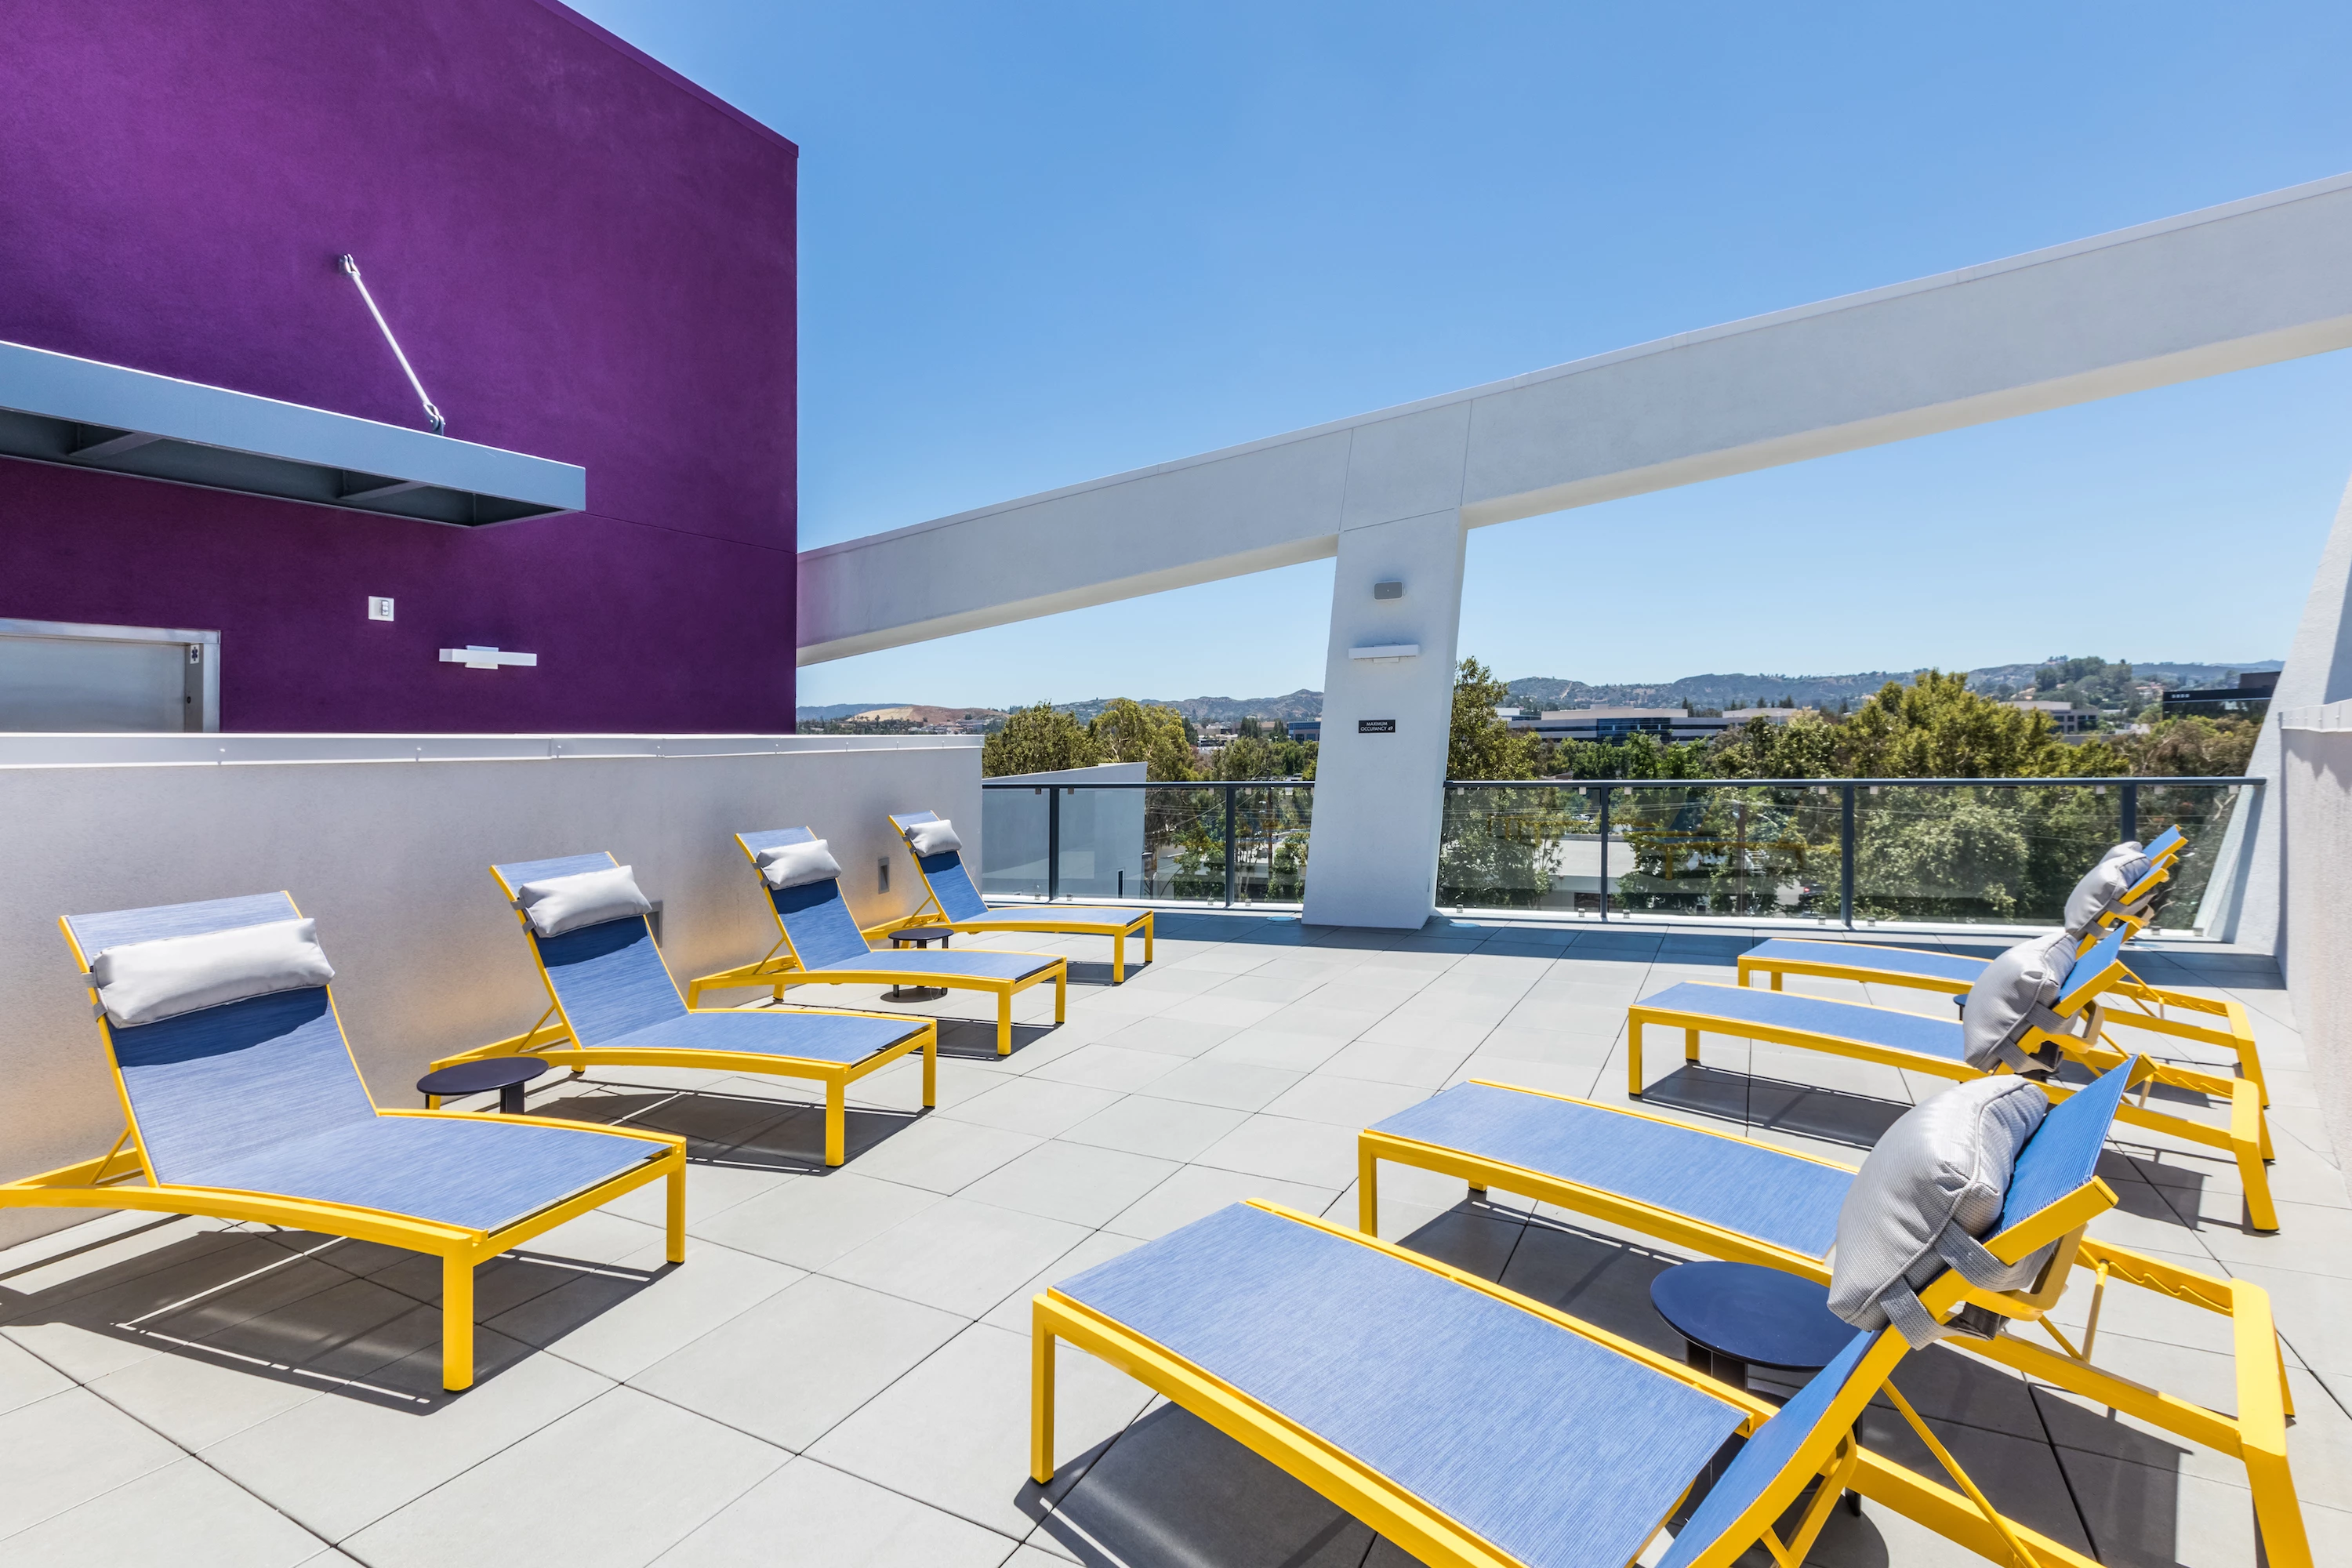 1251-9-amenity-tower-rooftop-lounge-sun-deck-at-vela-on-ox-apartments-in-woodland-hil.jpg